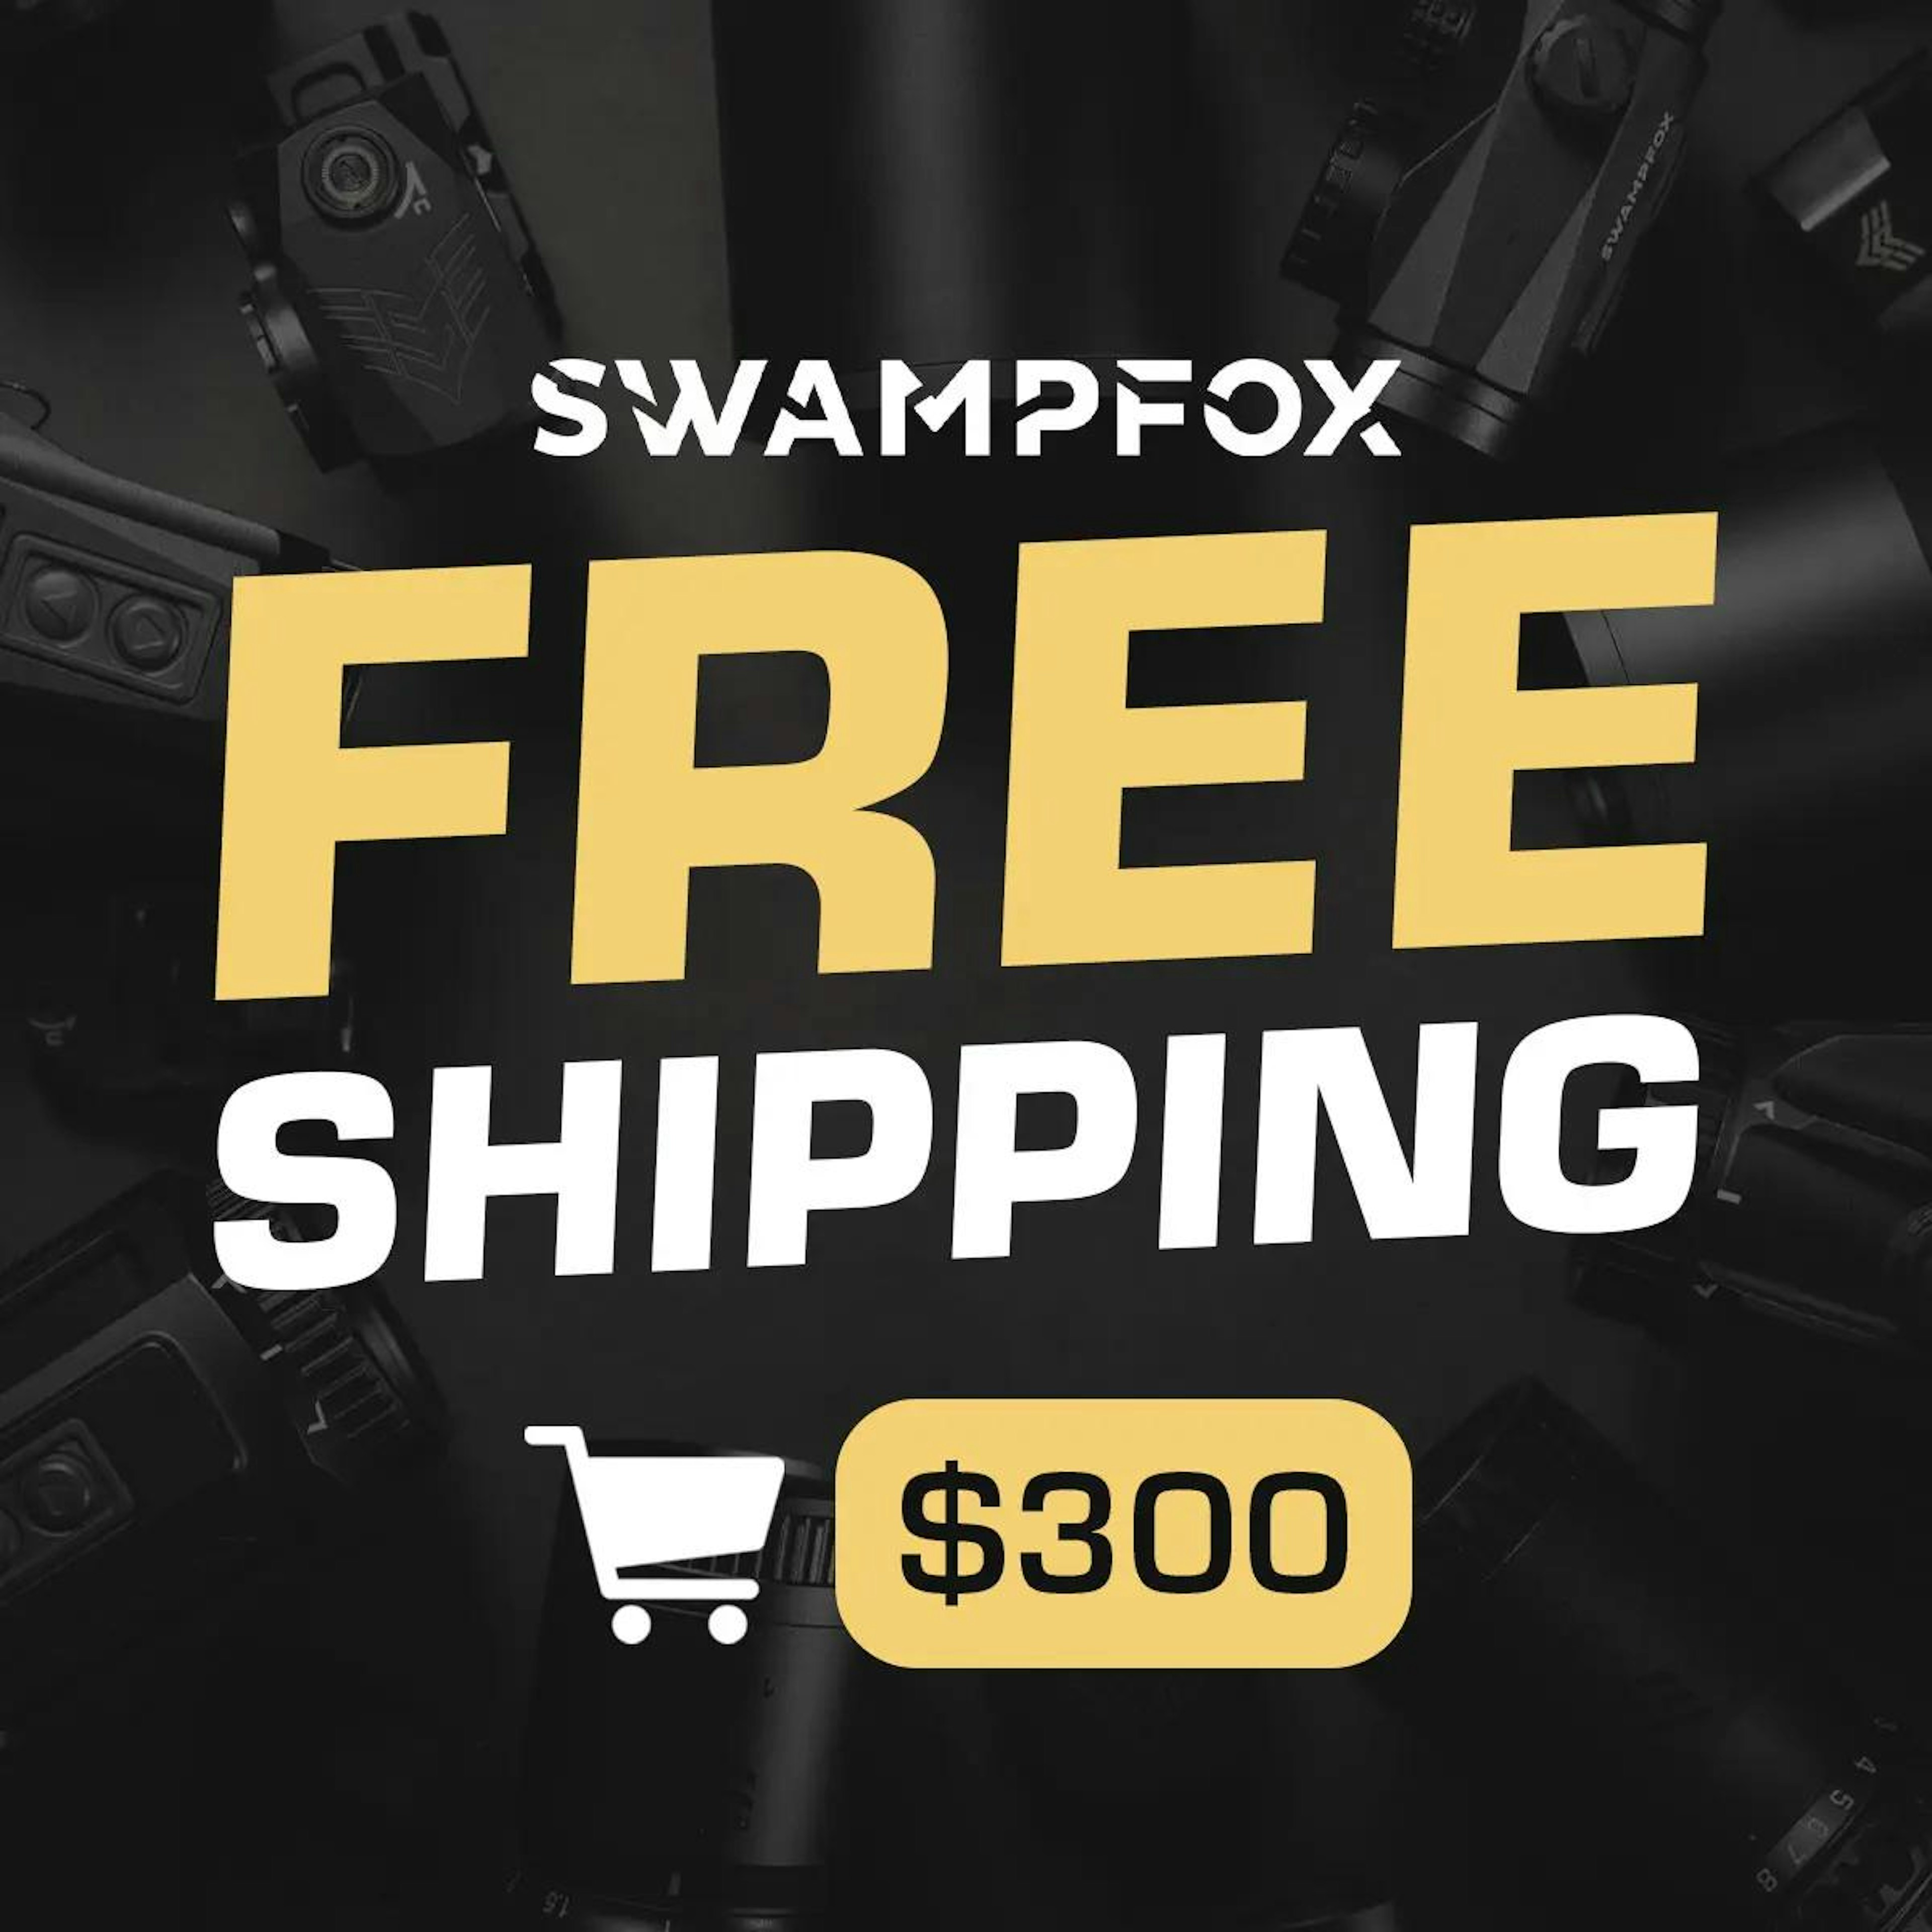 Spend $300, Get Free Shipping